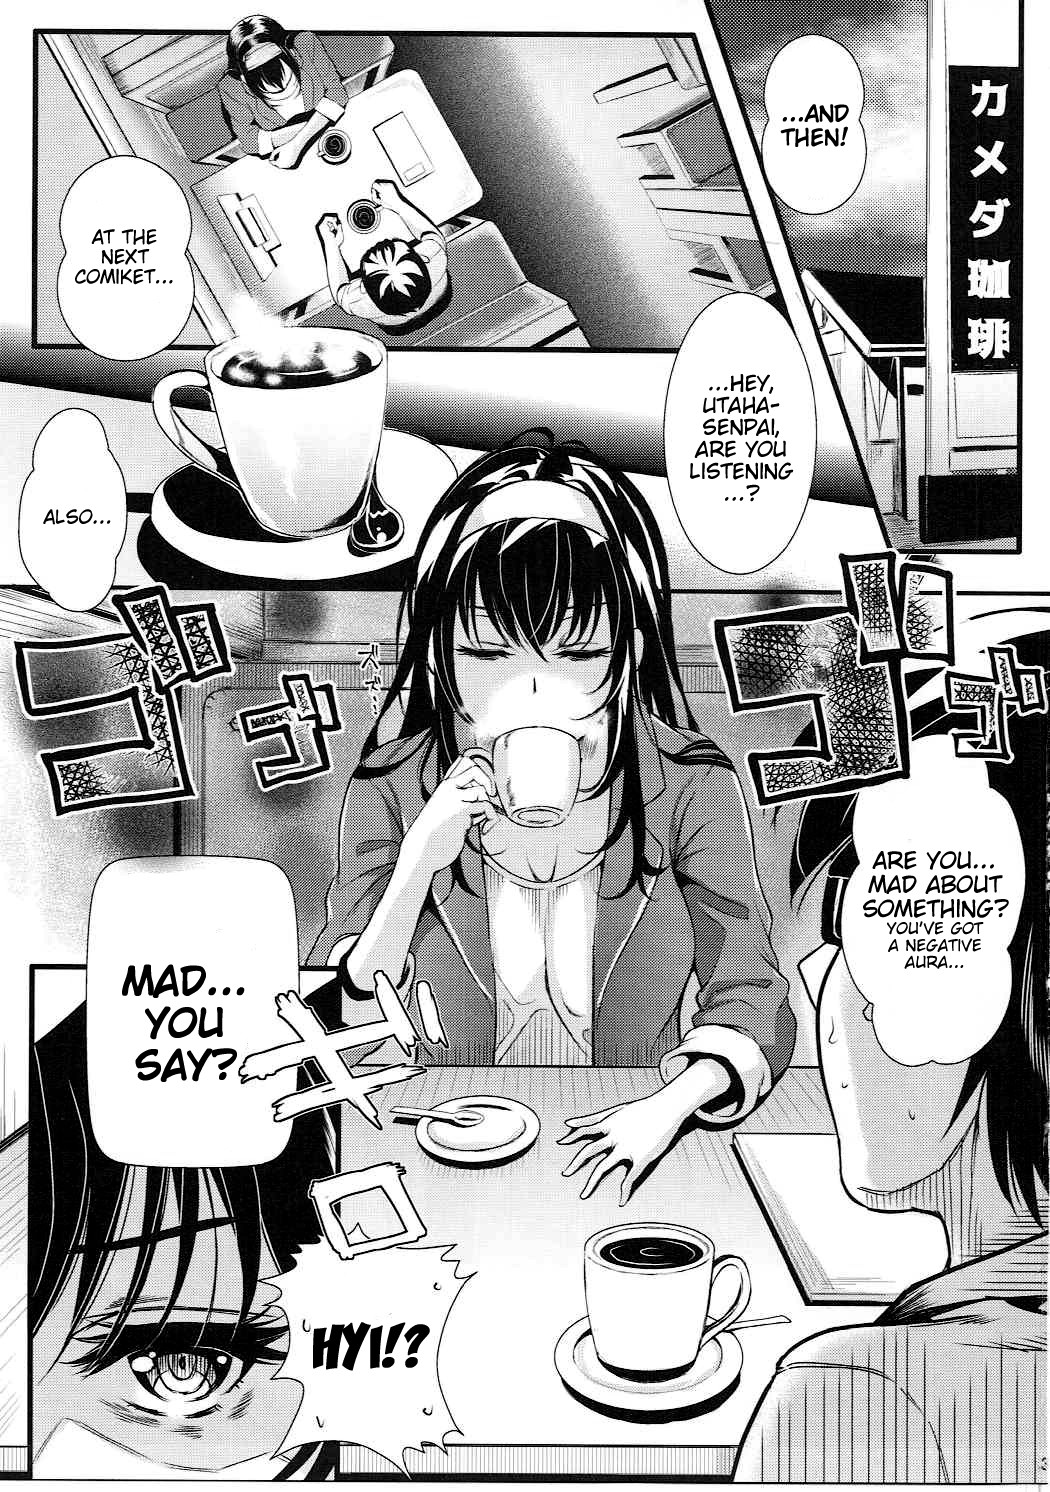 Hentai Manga Comic-How the Boring Couples Does It 4-Read-2